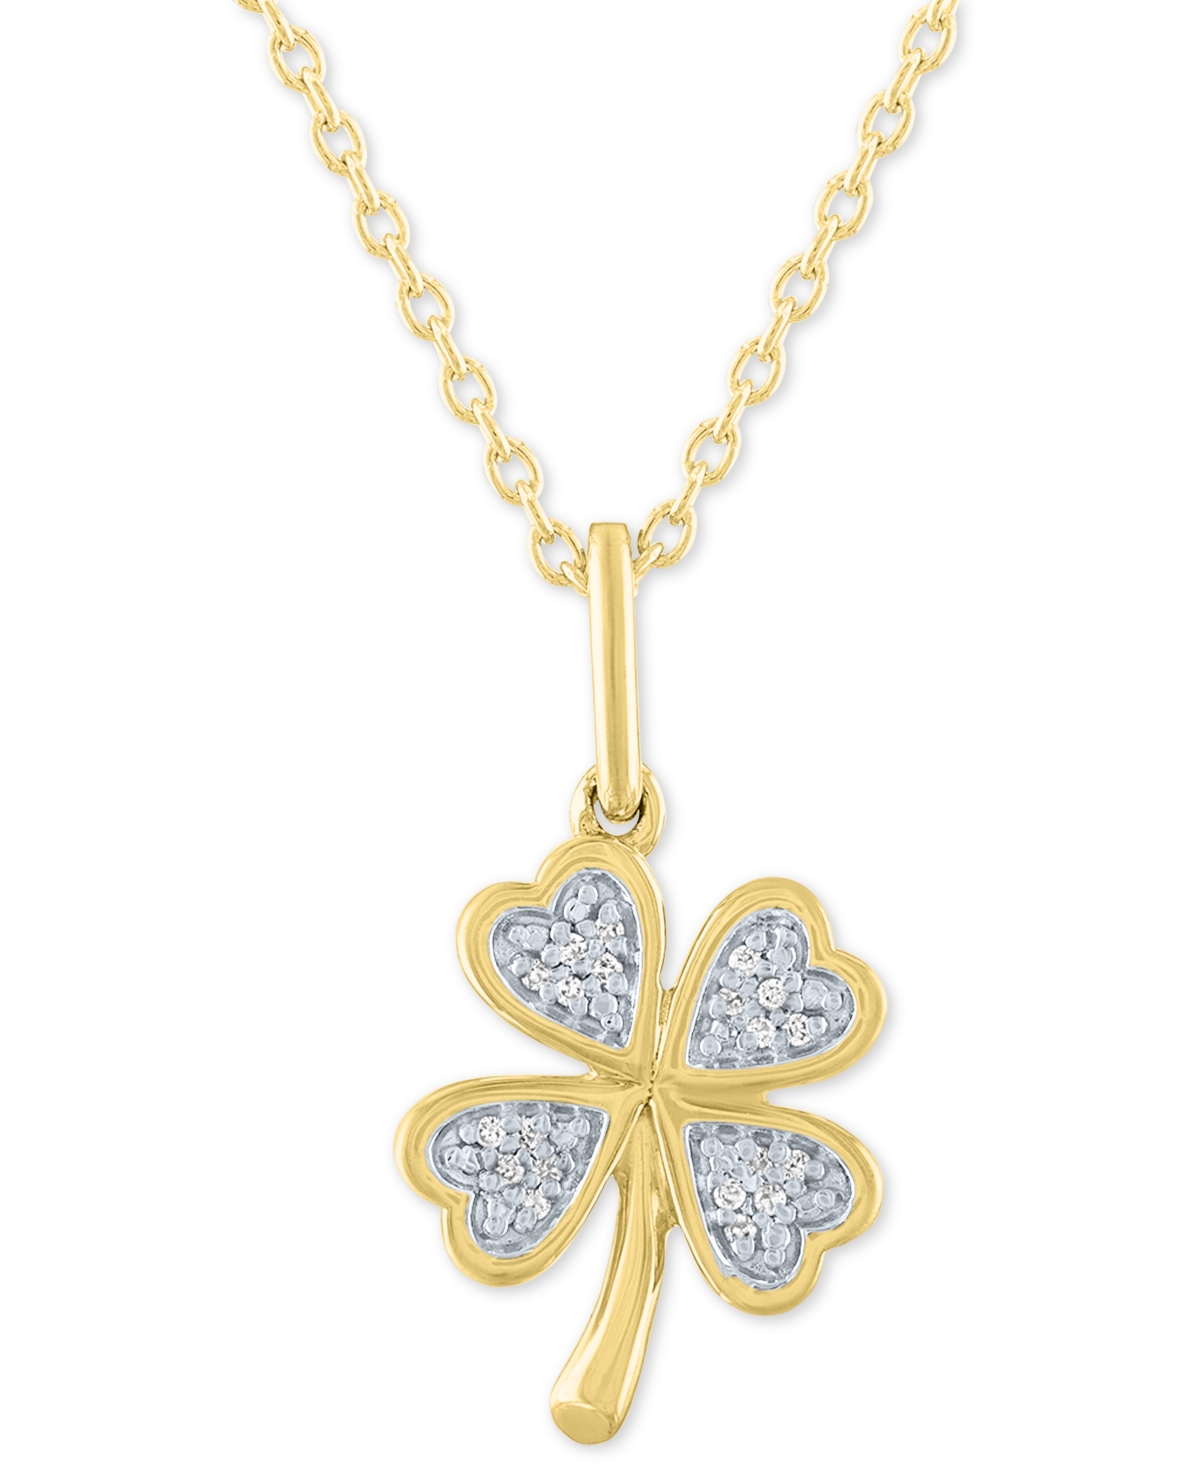 Macy's Diamond Accent Clover Pendant Necklace in 14k Gold-Plated Sterling Silver, 16" + 2" extender